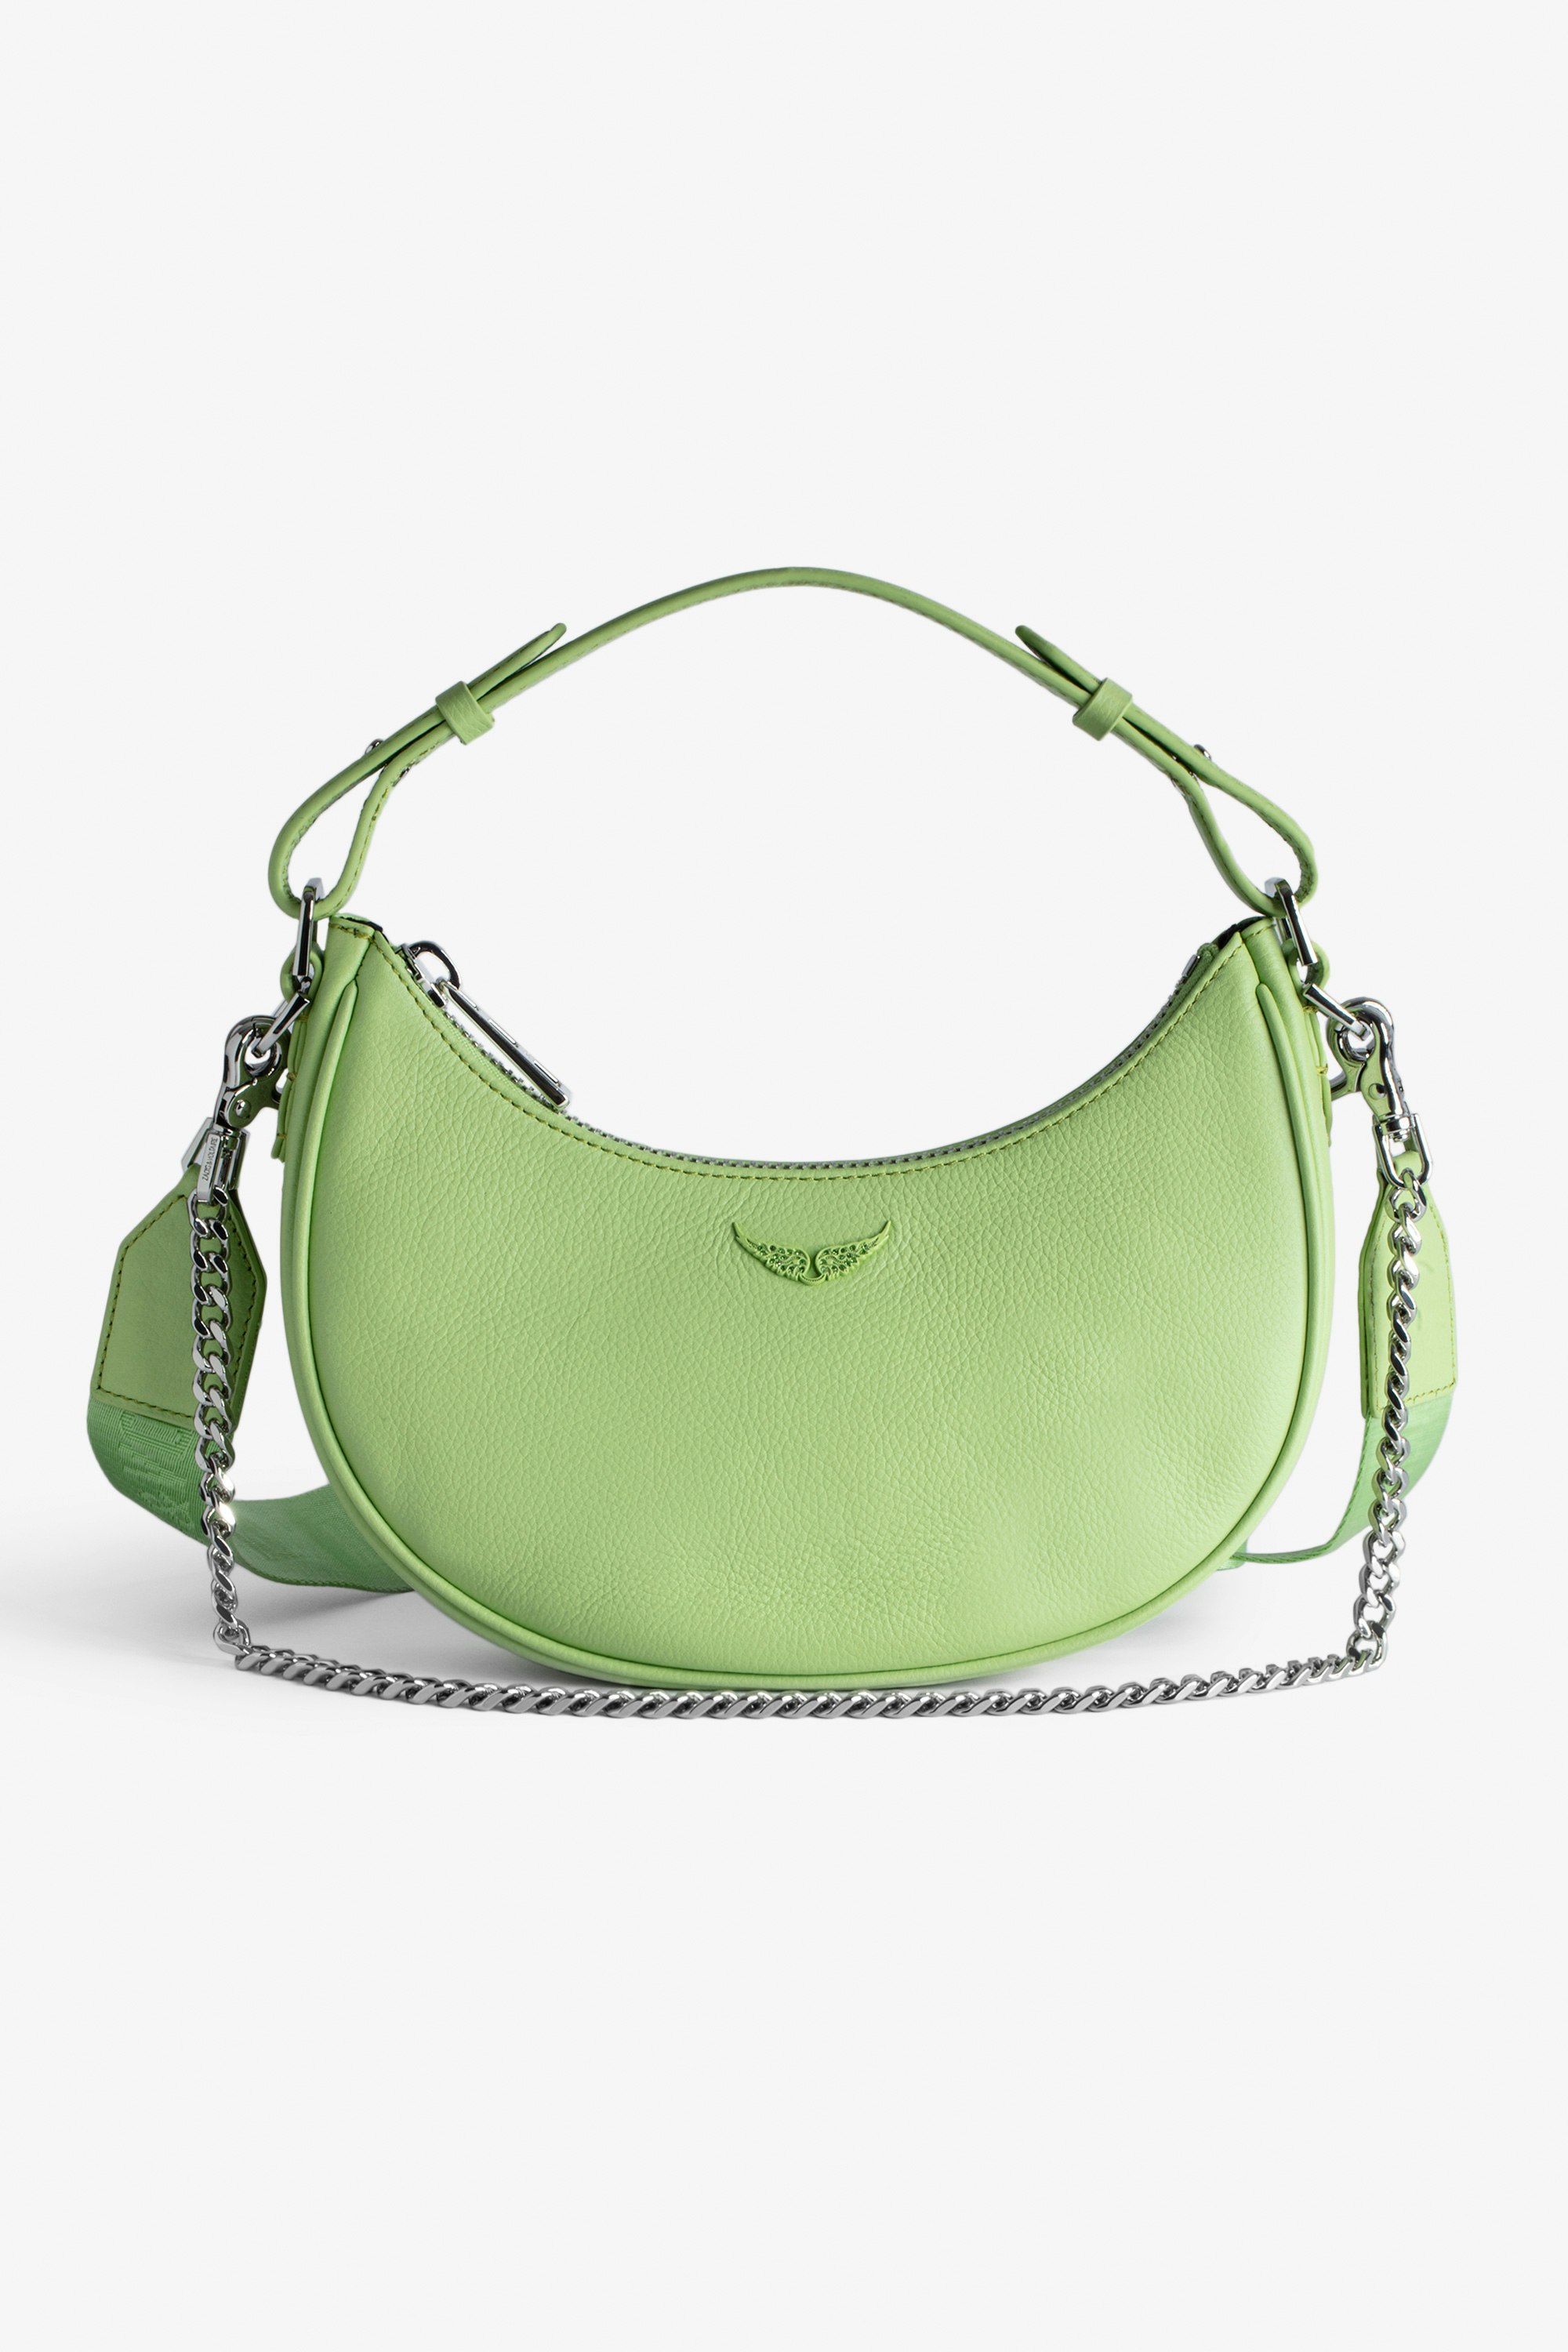 Moonrock bag Women’s half-moon bag in green grained leather with a short handle, shoulder strap, chain and signature wings.